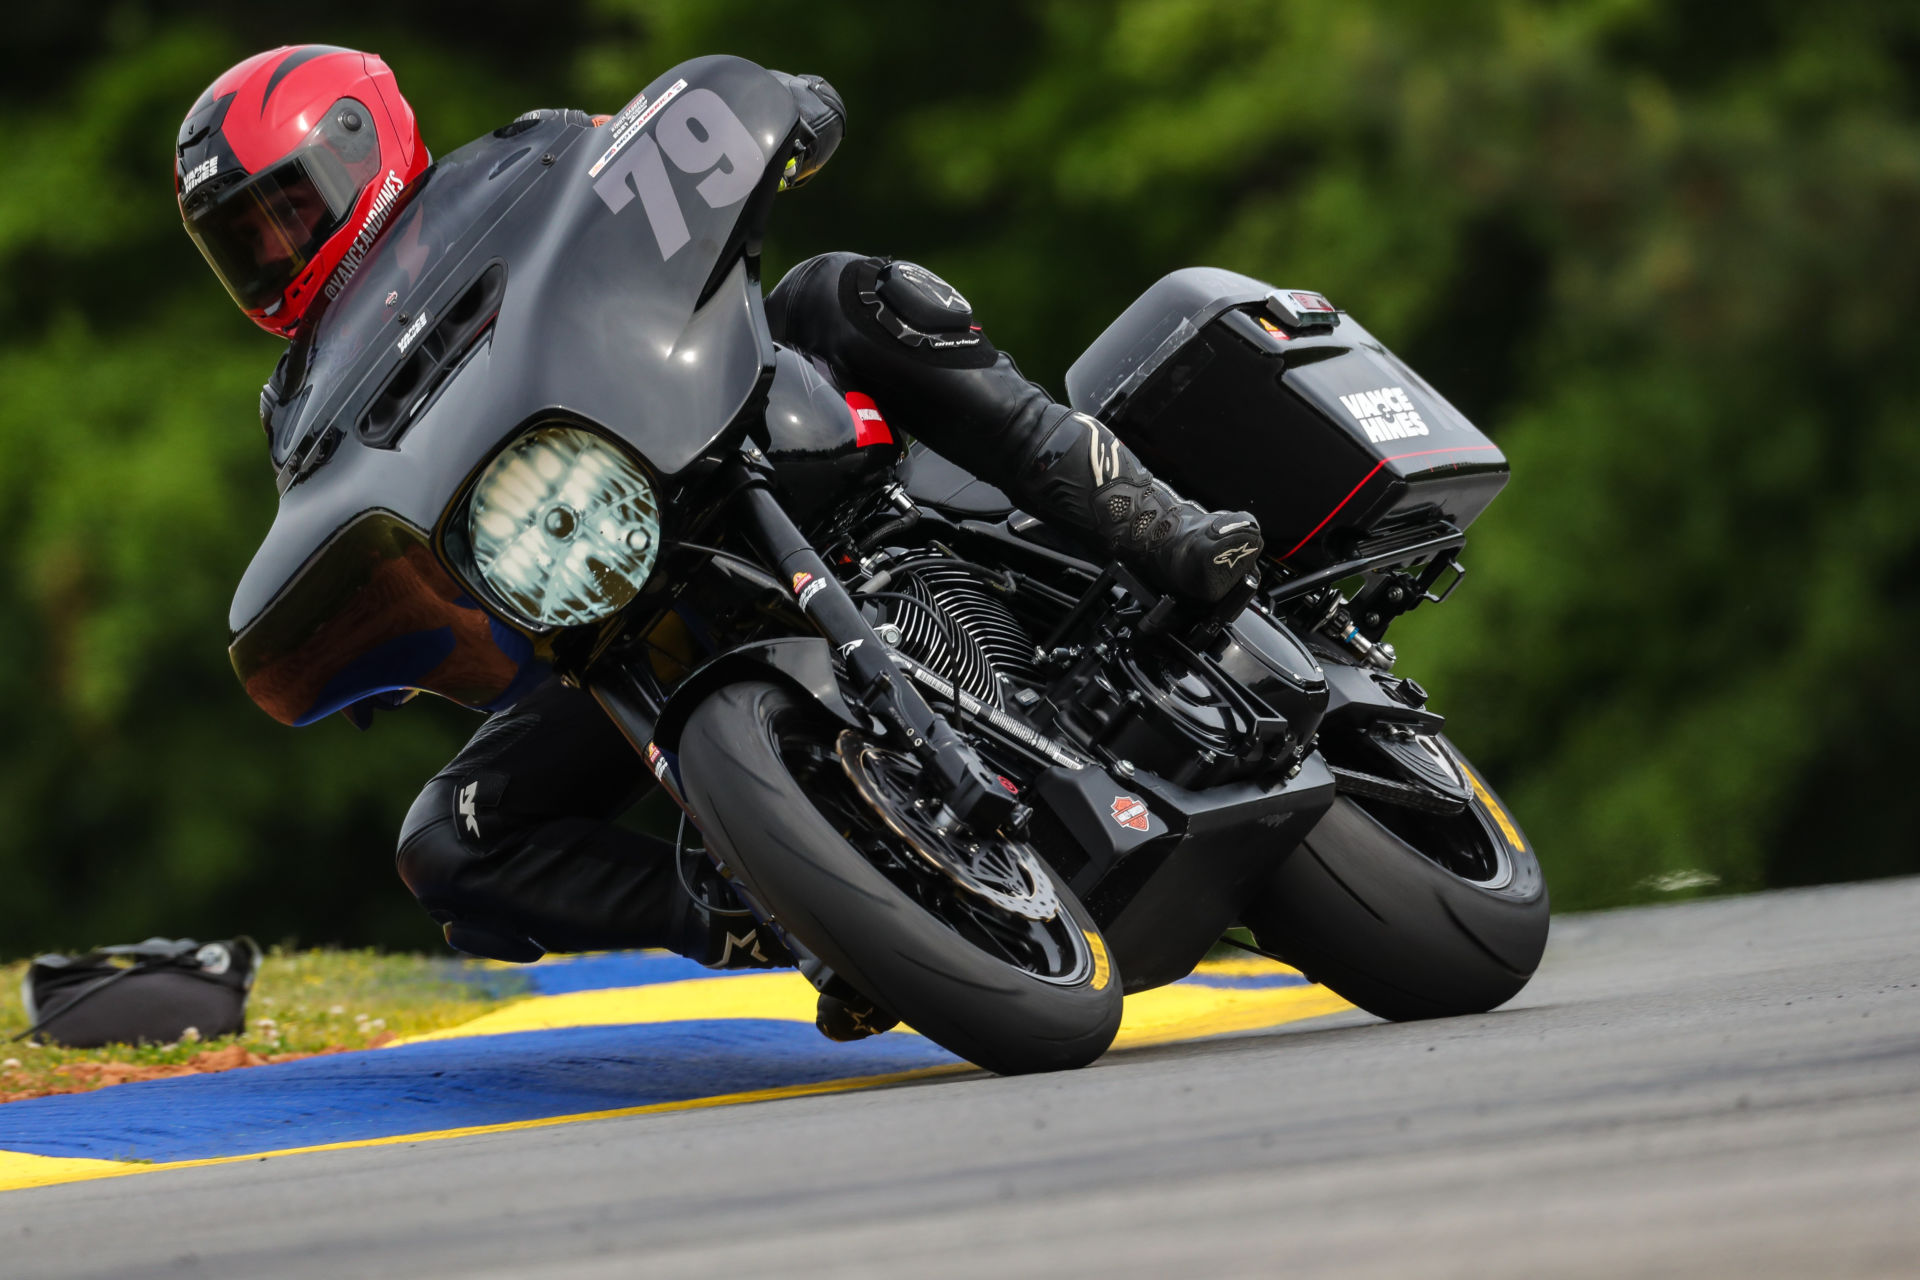 Hayden Gillim (79) riding a Vance & Hines Harley-Davidson during the MotoAmerica King Of The Baggers race at Road Atlanta in 2021. Photo by Brian J. Nelson.